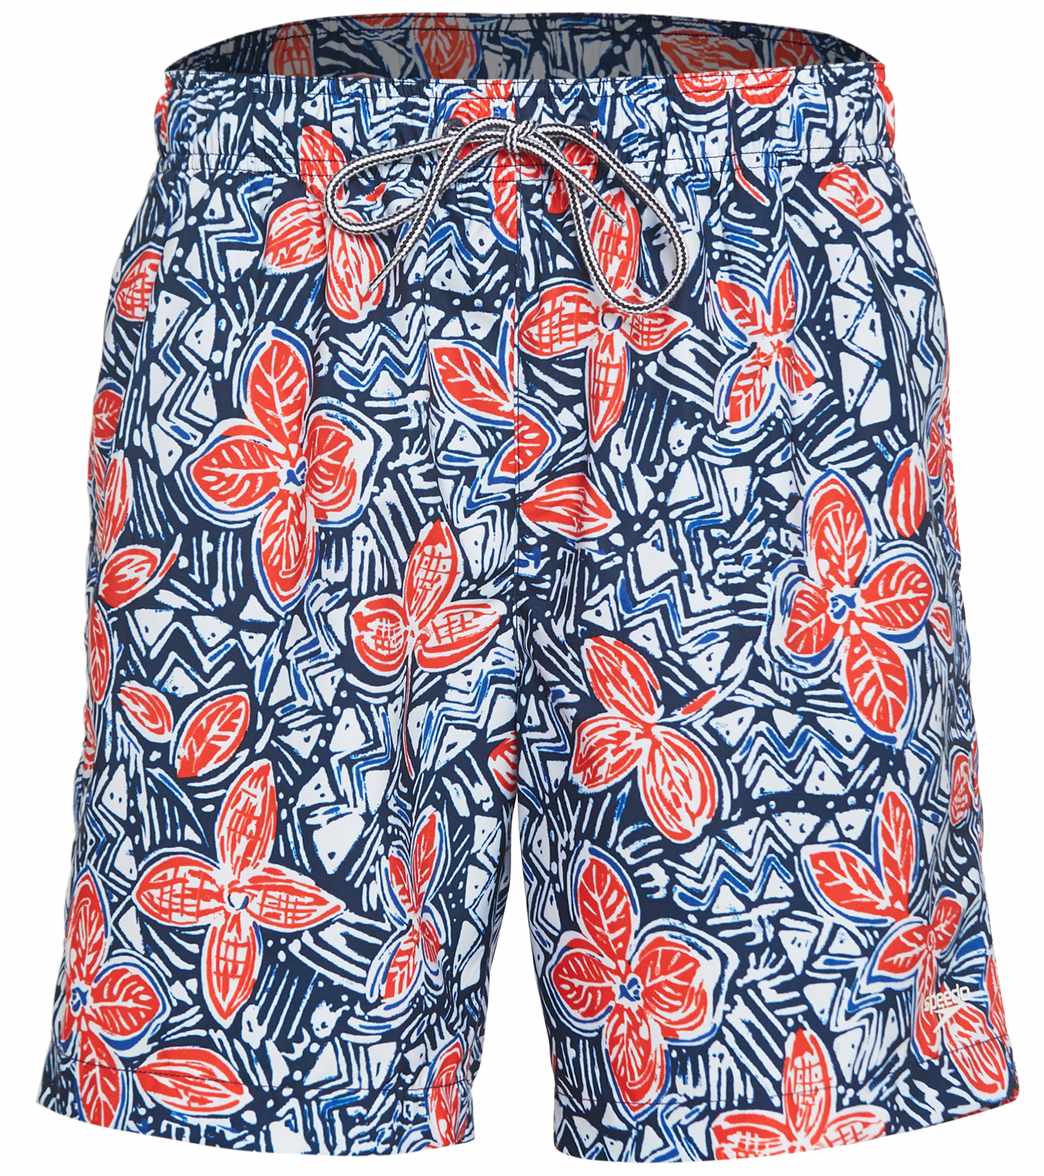 Speedo Men's 18 Active Boom Floral Redondo Volley Short - Red/White/Blue Xxl Polyester - Swimoutlet.com